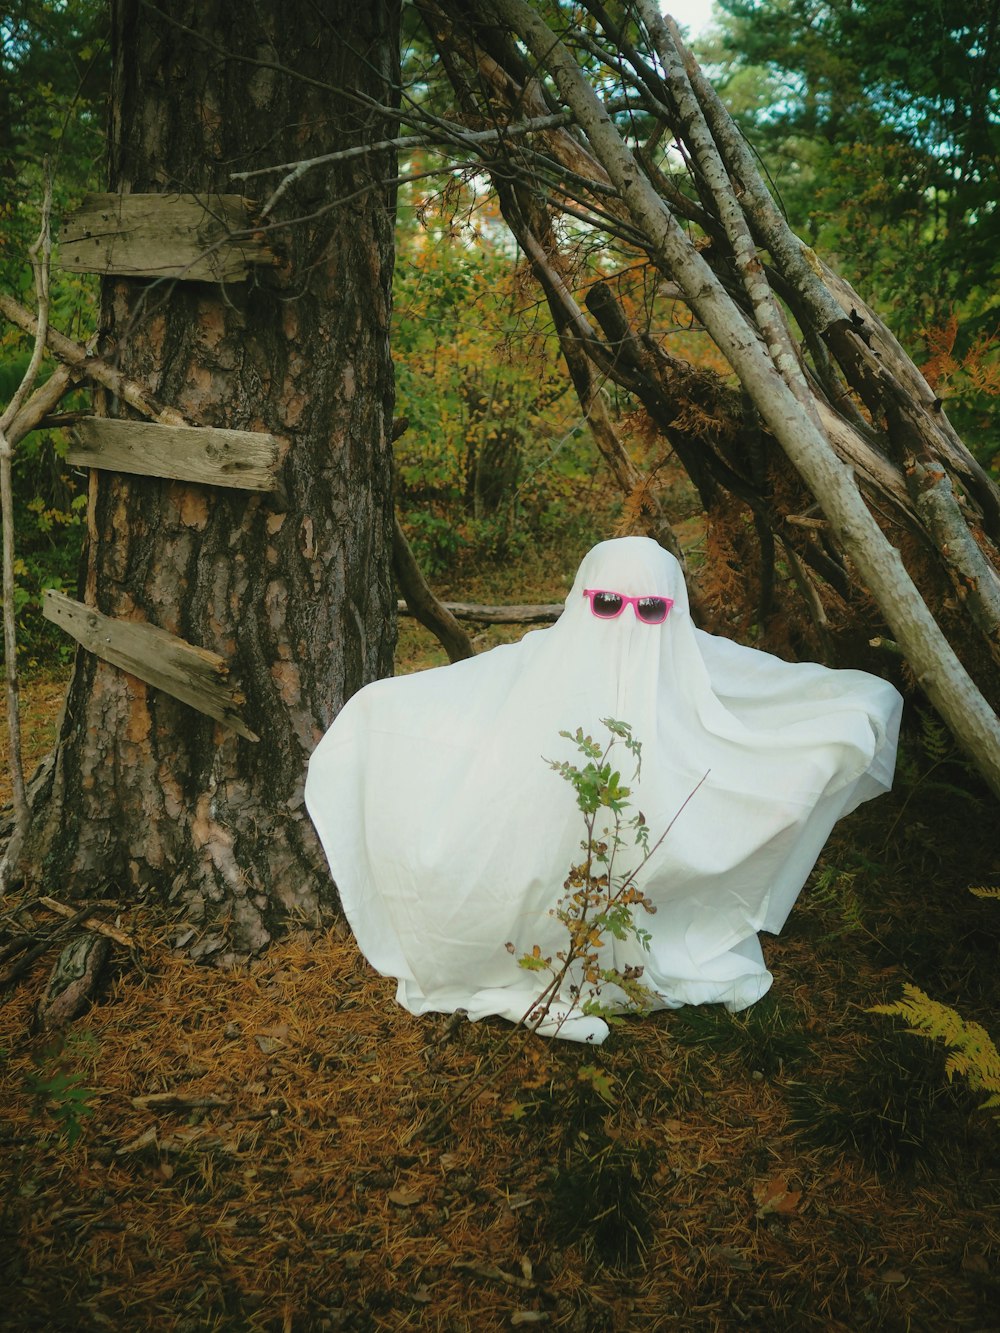 a white statue of a person in a white garment sitting in a forest